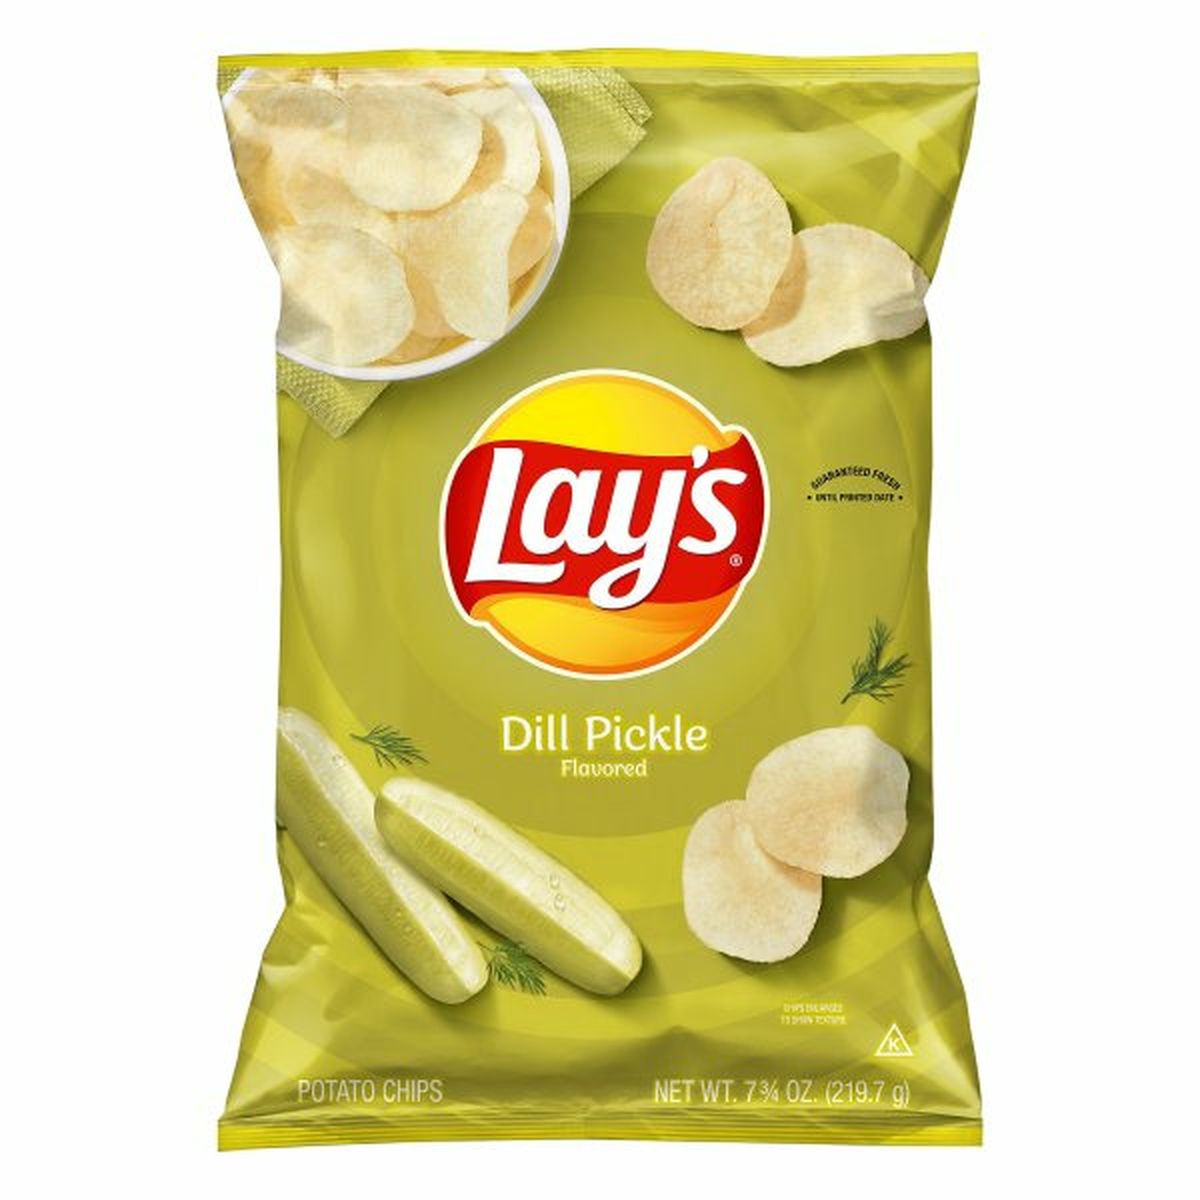 Calories in Lay's Potato Chips, Dill Pickle Flavored